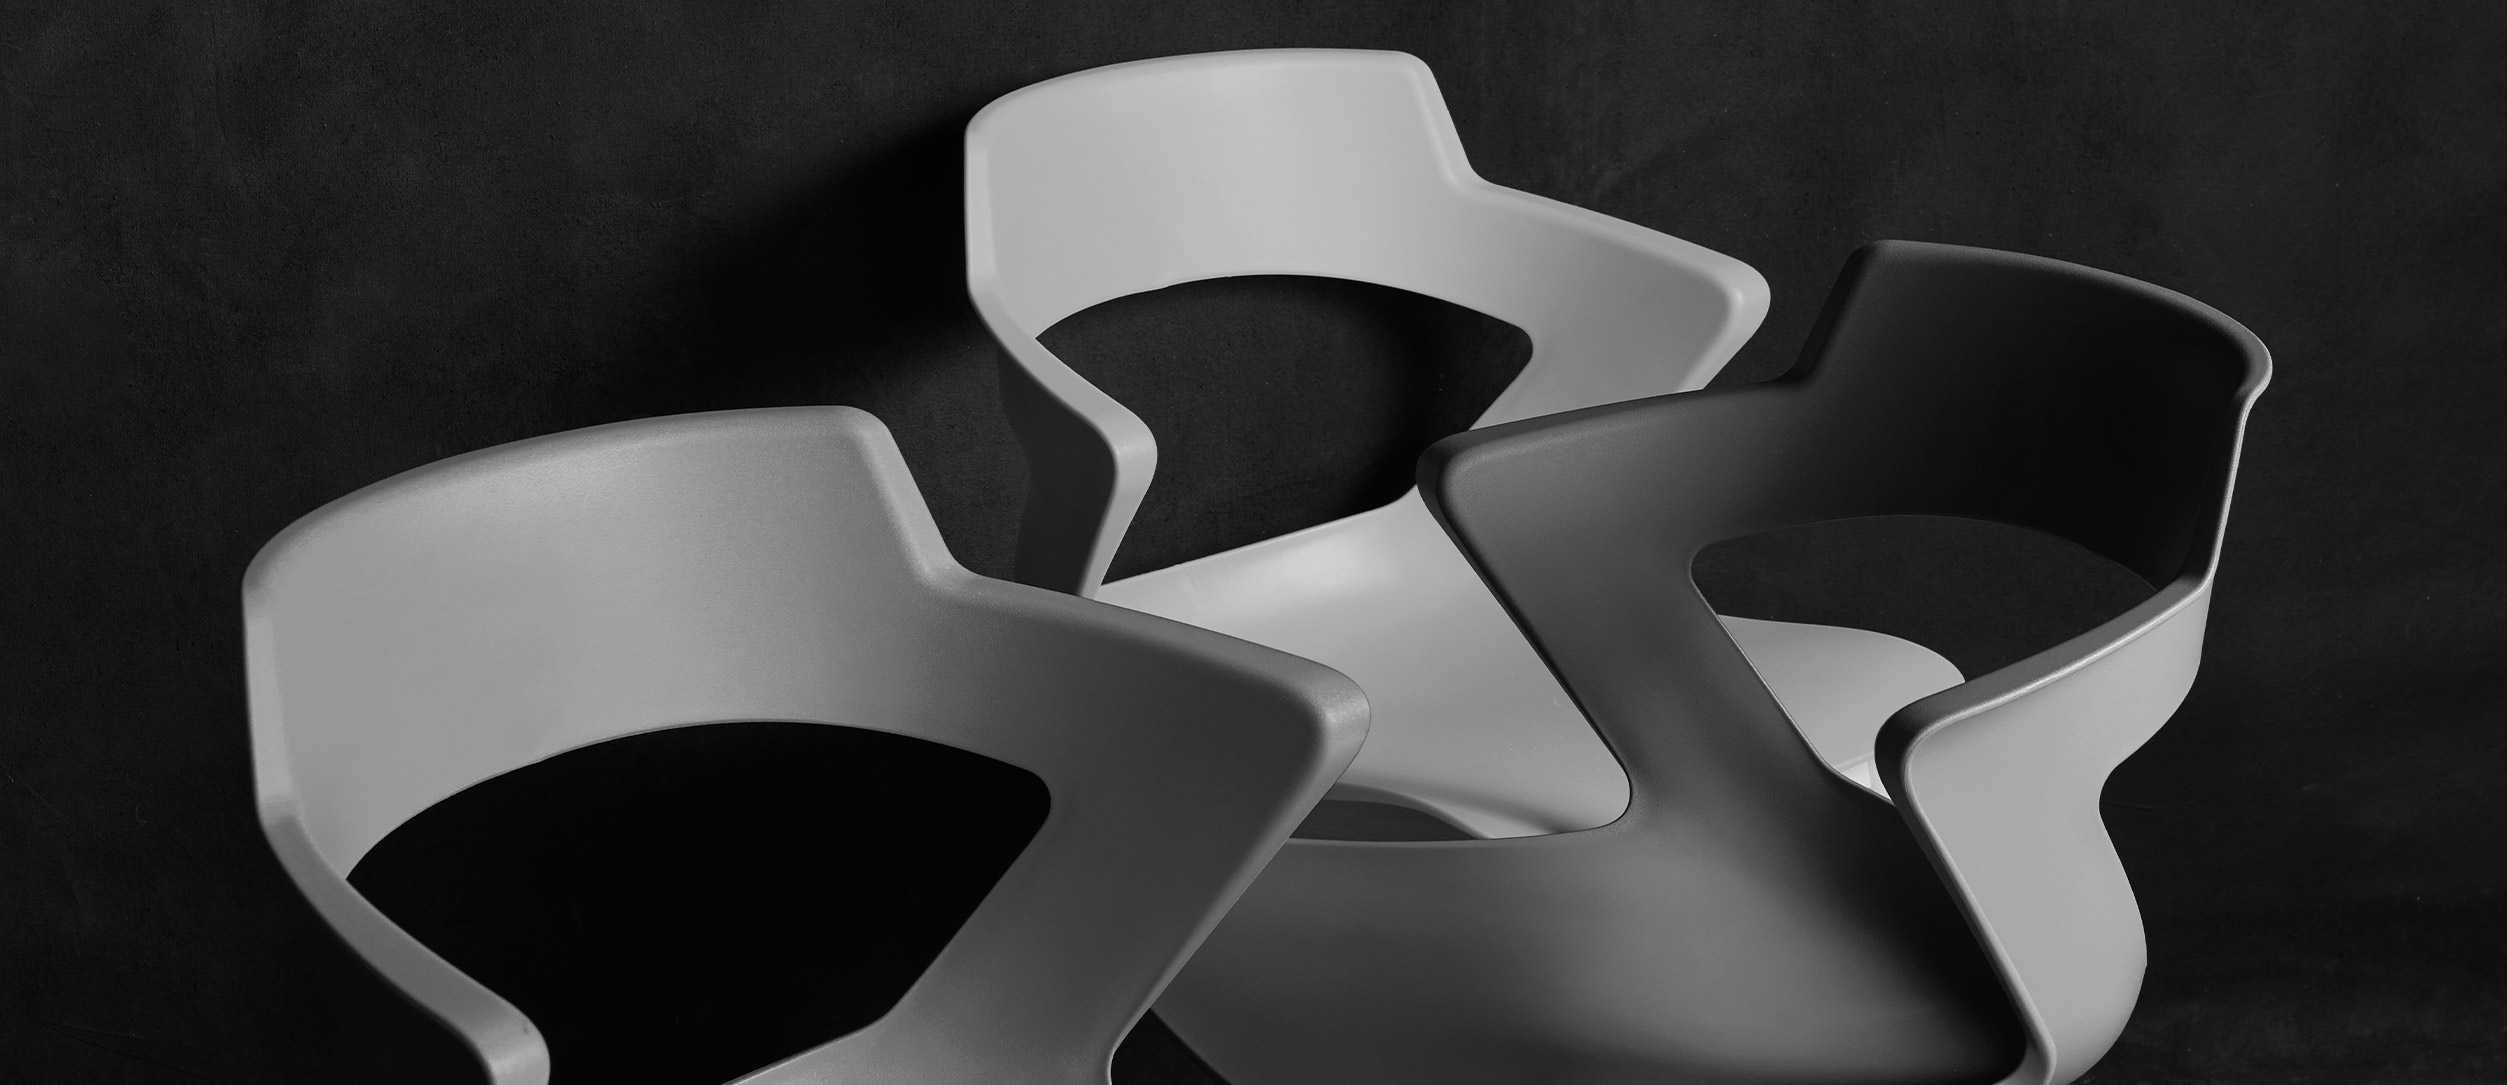 Close up of several Zee chairs by designers Grey Design Studio.